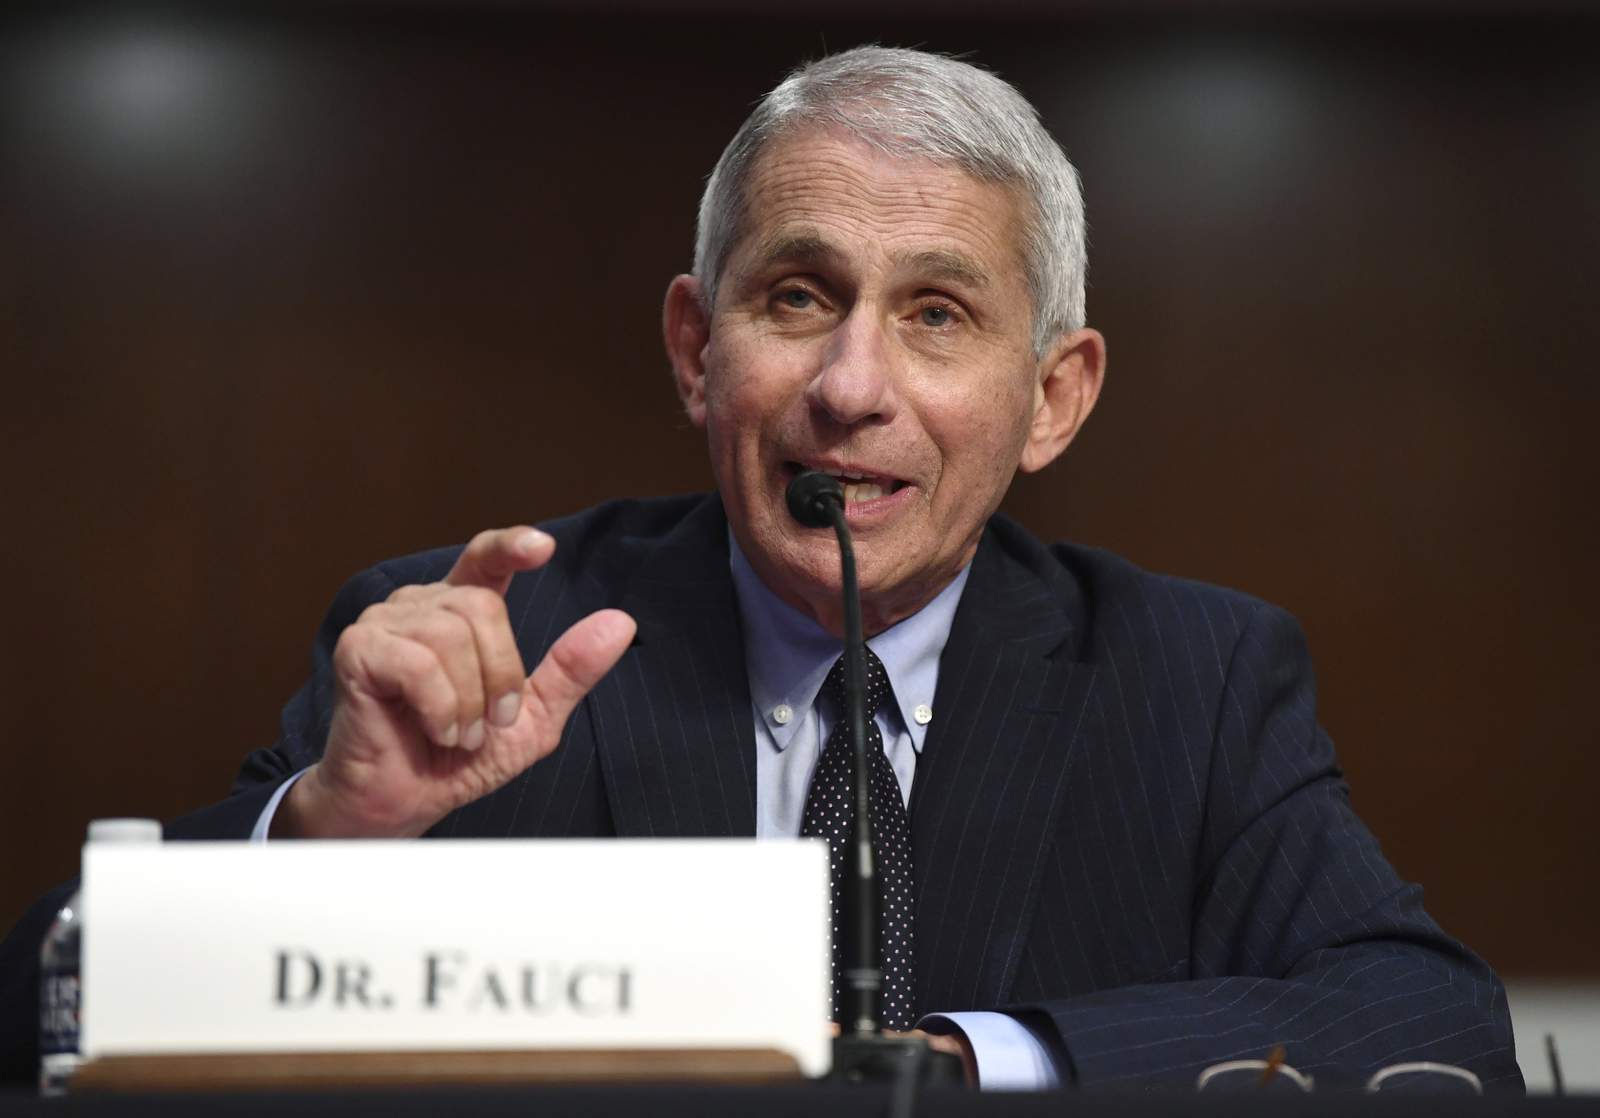 Fauci: US 'going in wrong direction' in coronavirus outbreak